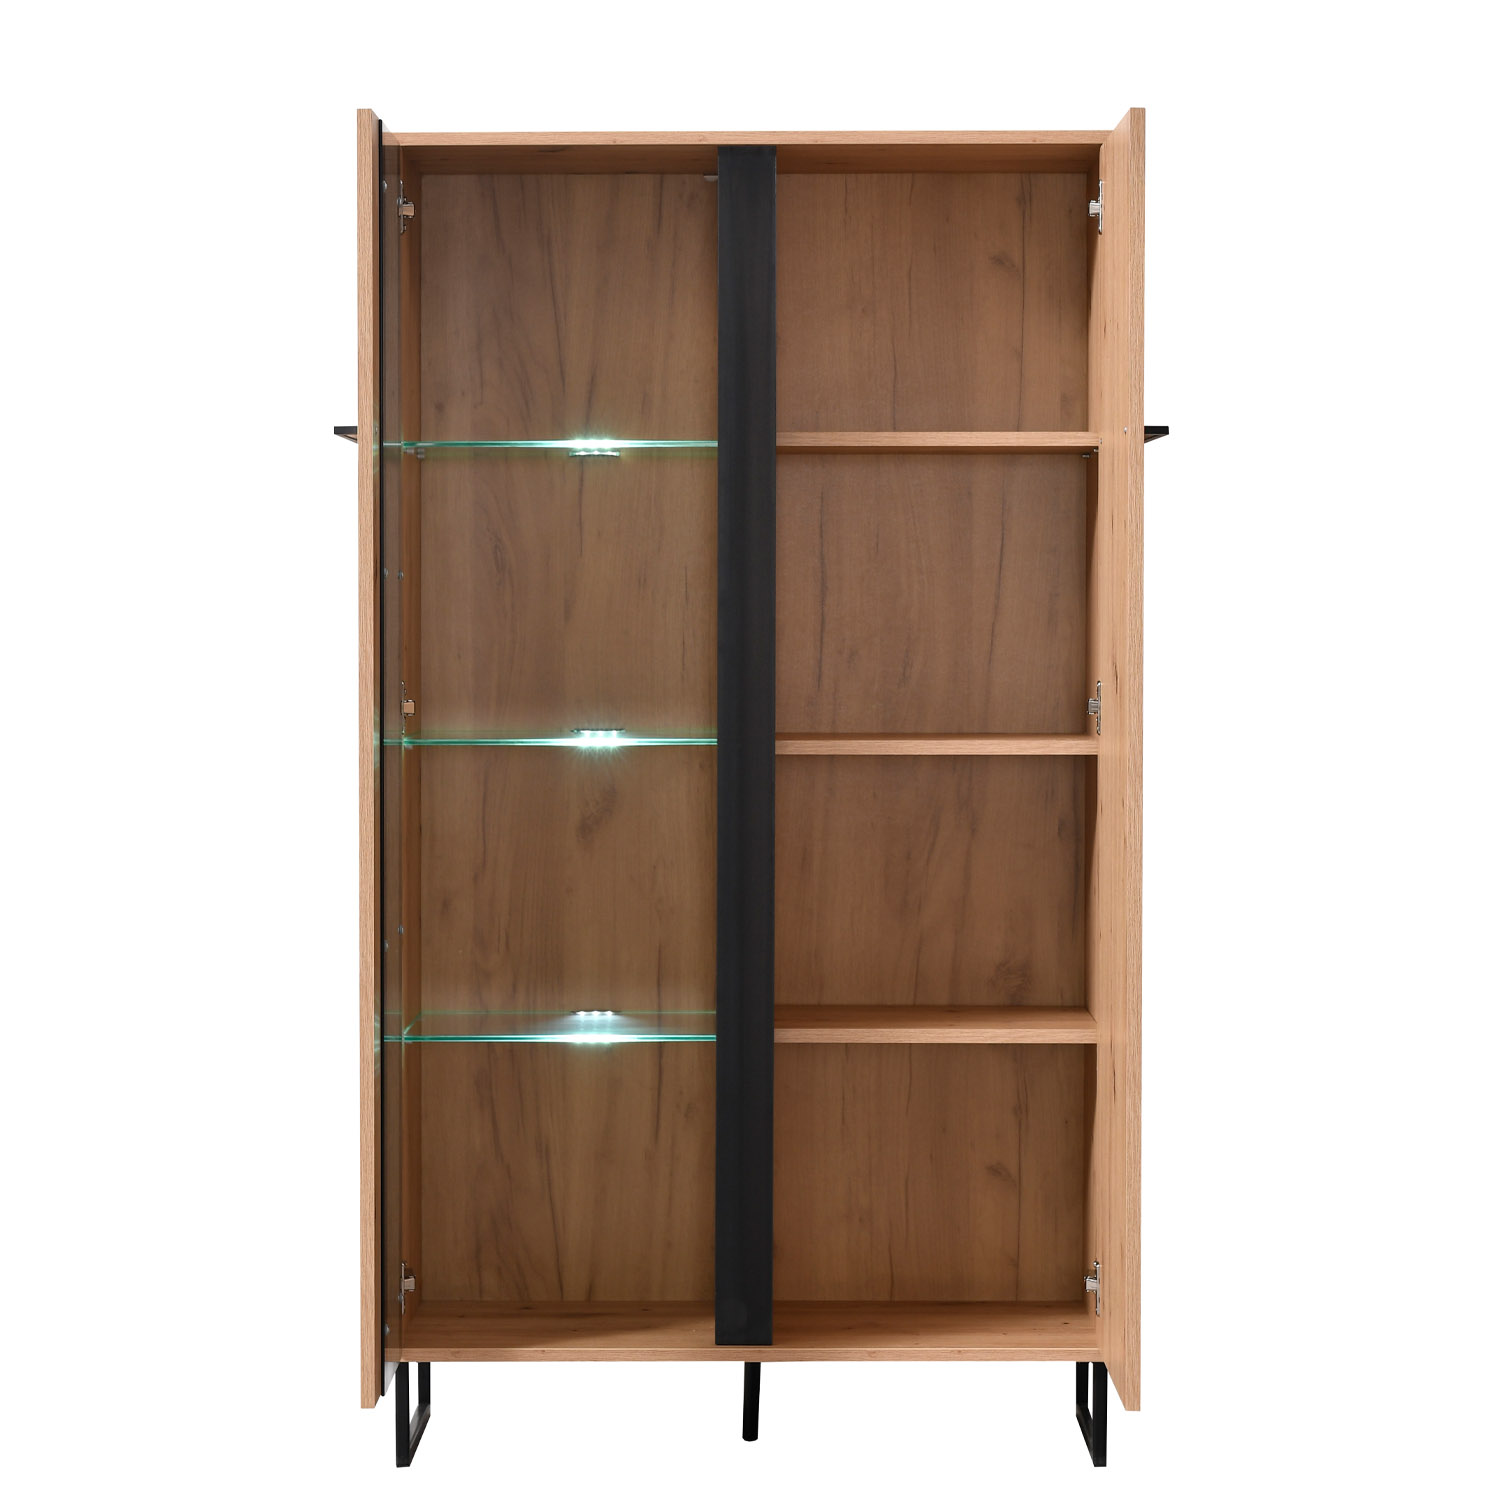 Highboard Display Cabinet with Compartments Living Room Cabinet Wood Natural Skid Feet Black